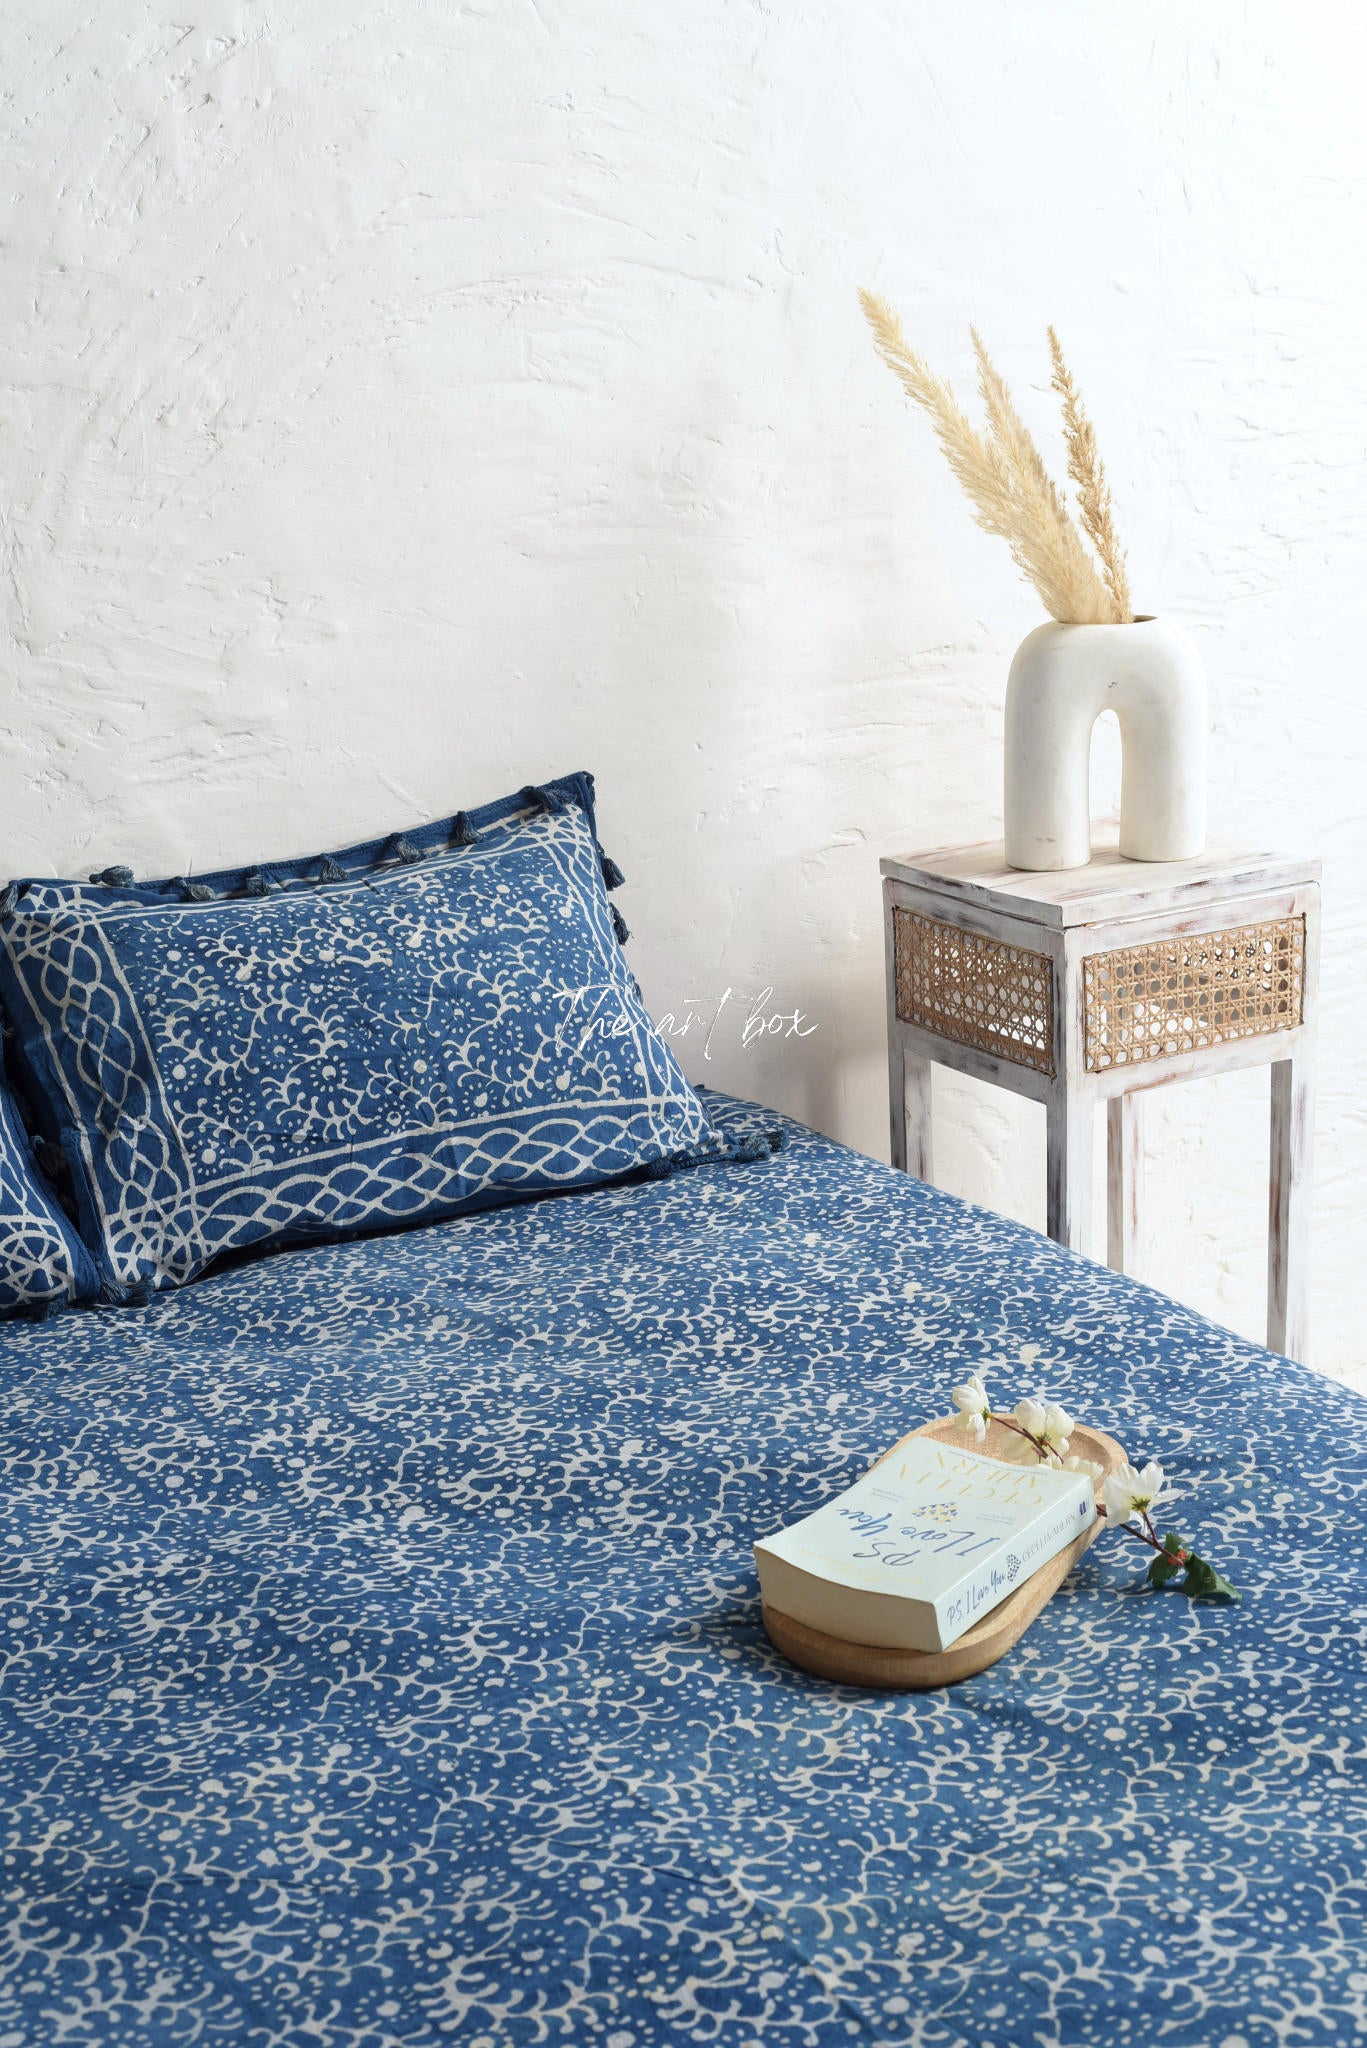 Ethnic Floral Block Printed Bedsheet and Pillow Set